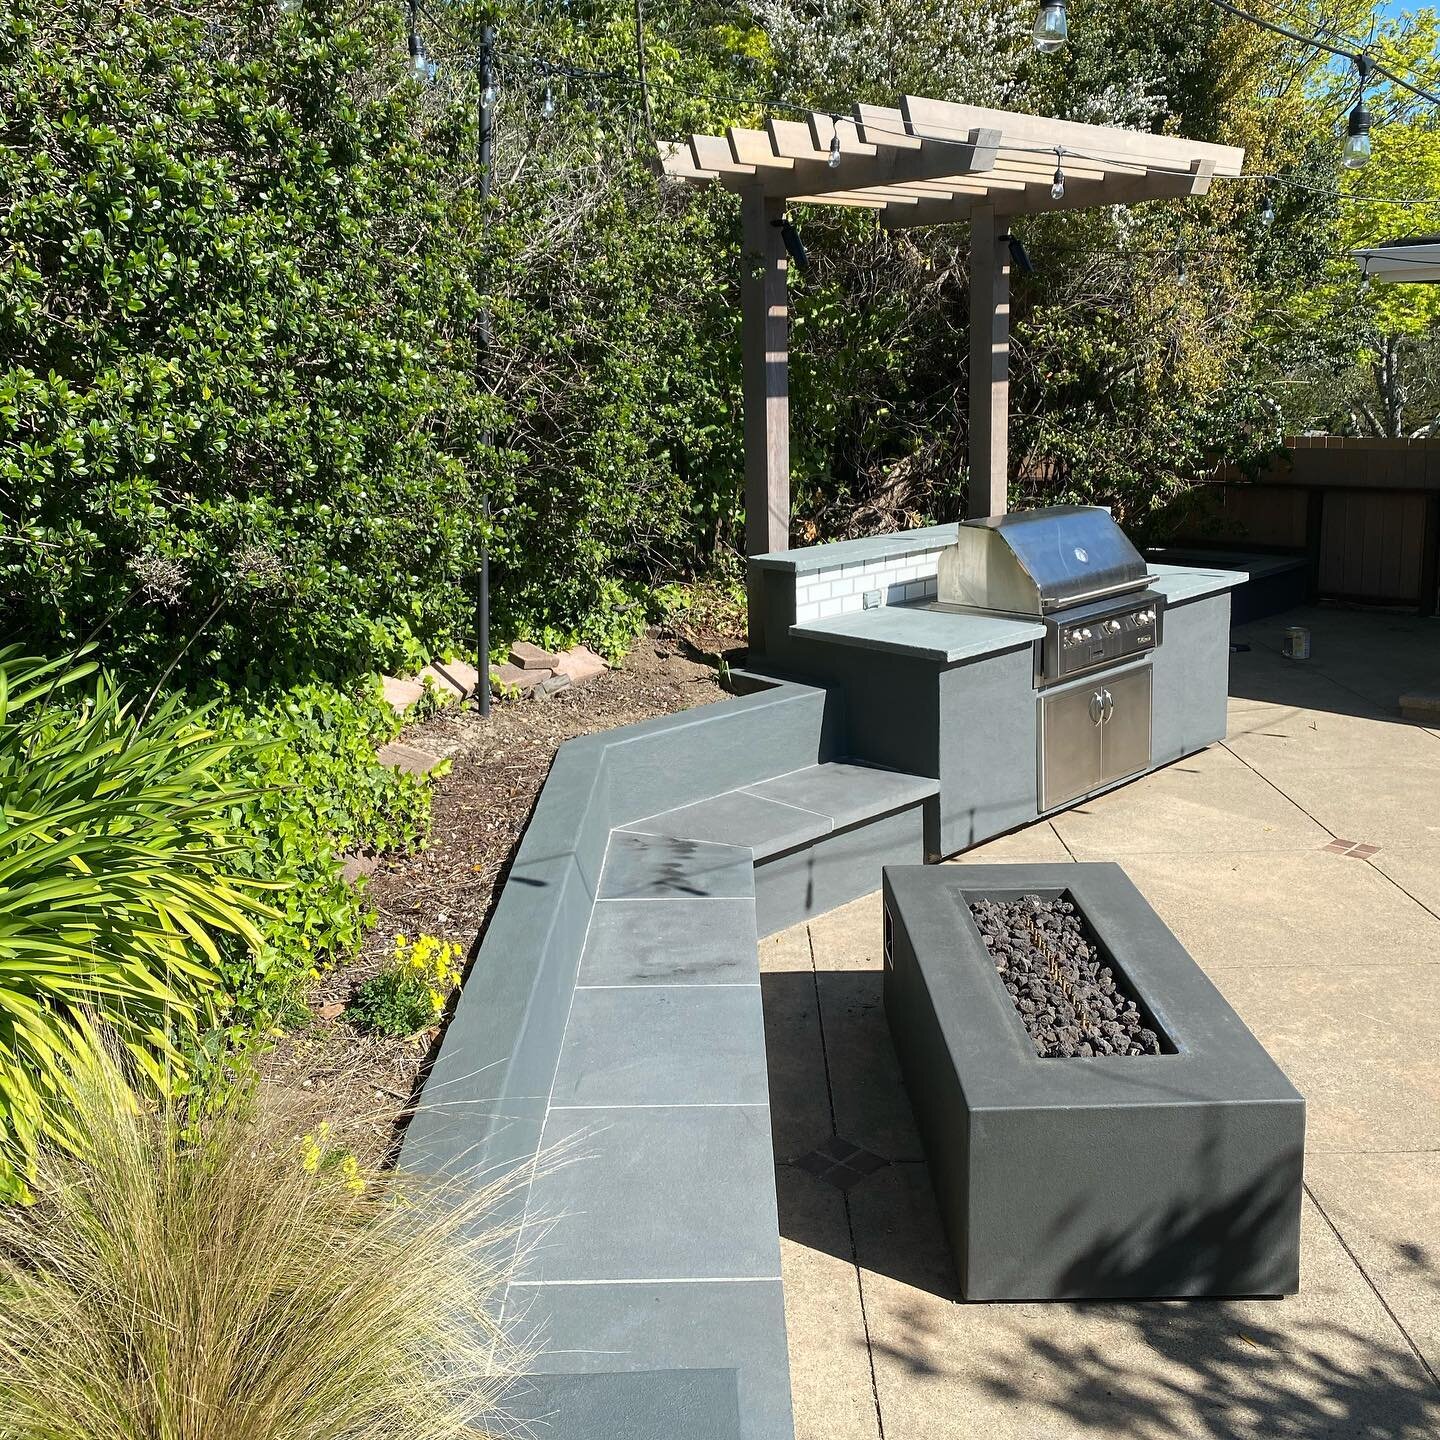 A little Pergola, Bluestone BBQ &amp; Bluestone Bench for some awesome clients in Mill Valley. Ready for some BBQ chills.
#bluestone #readyforsummer #marinremodeling